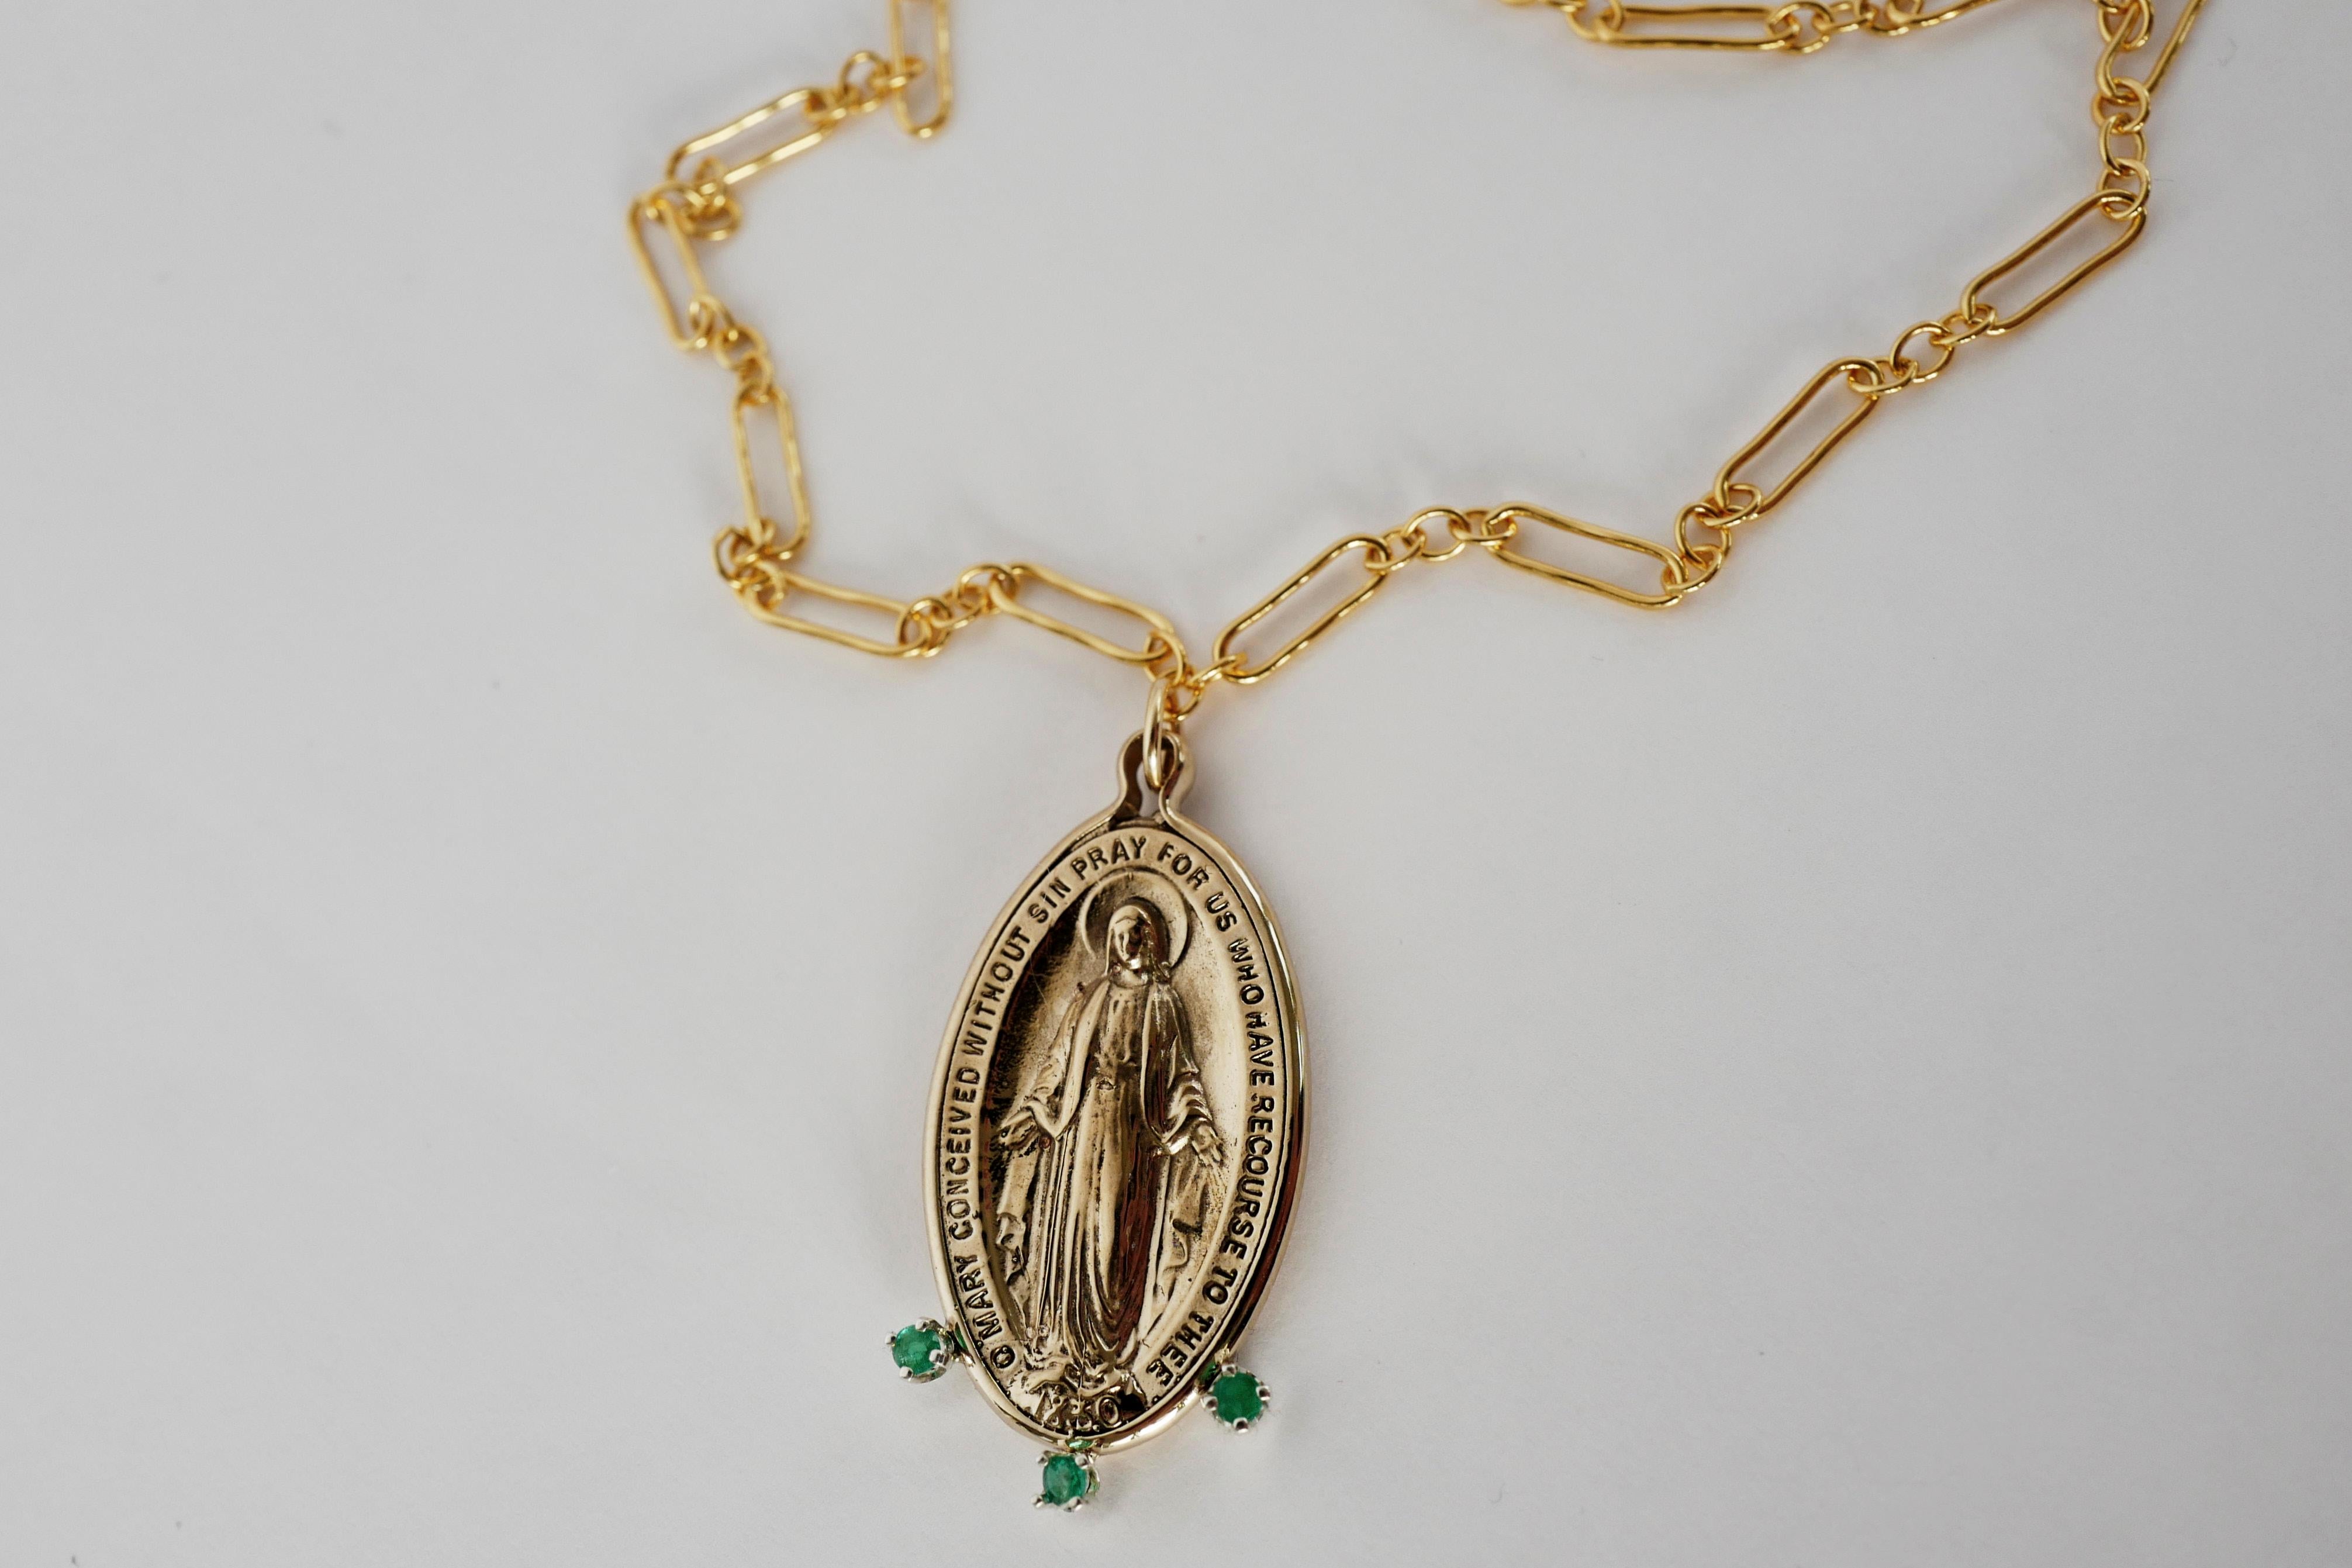 Emerald Virgin Mary Oval Medal Chain Necklace Gold Filled Chain J Dauphin For Sale 1